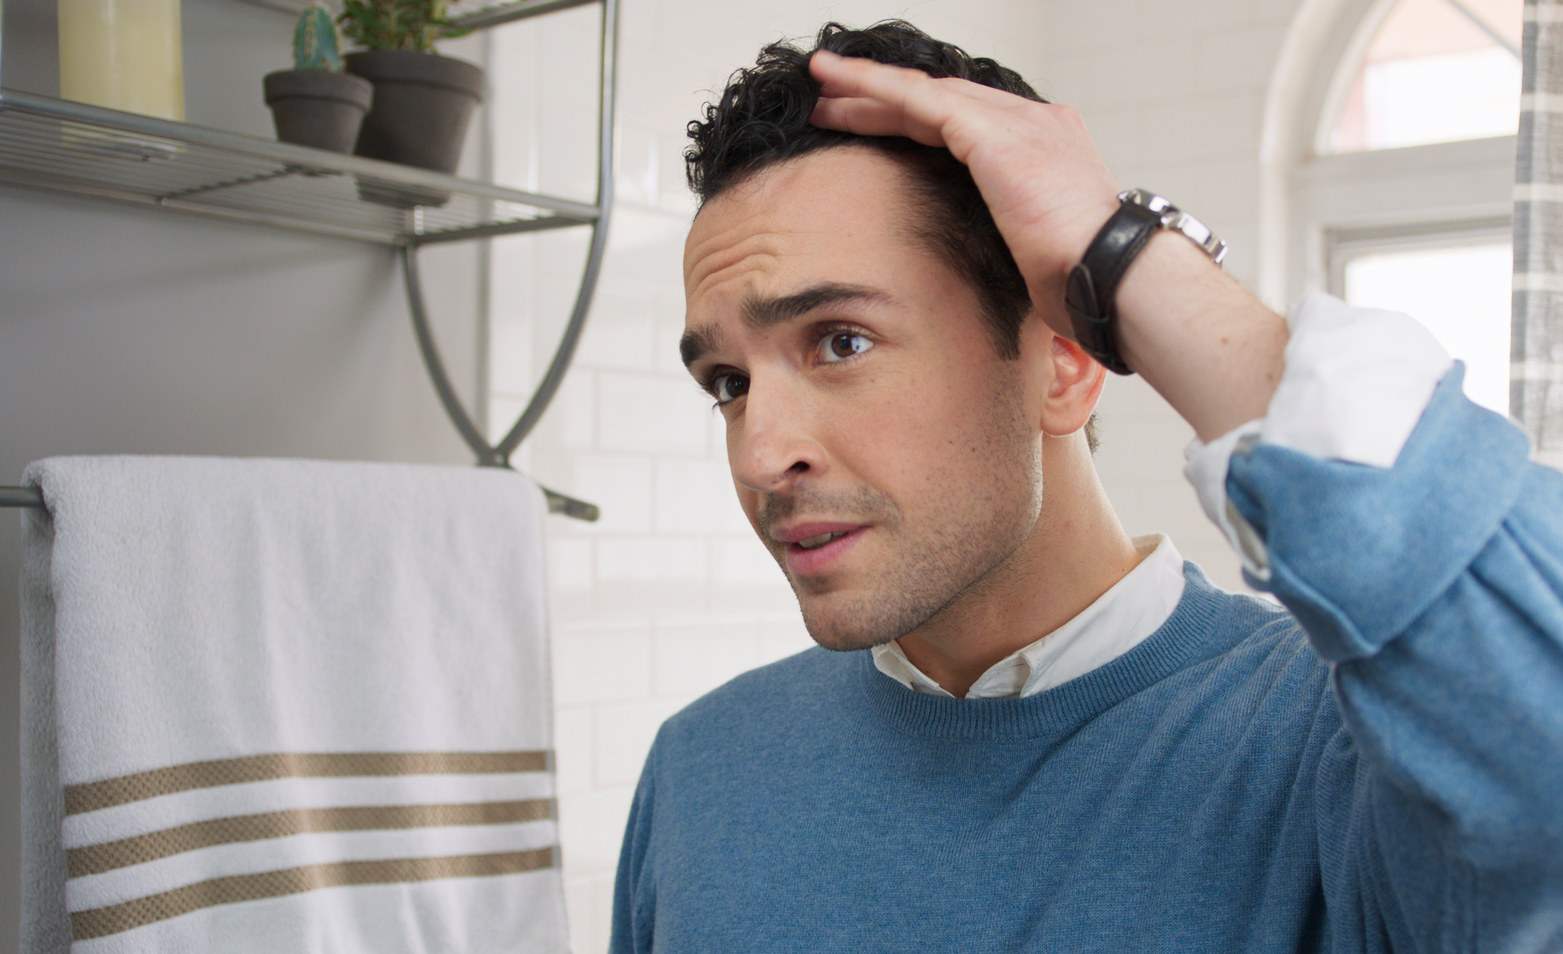 Hair Loss Shampoos: Why They Don't Work for Male Pattern Hair Loss